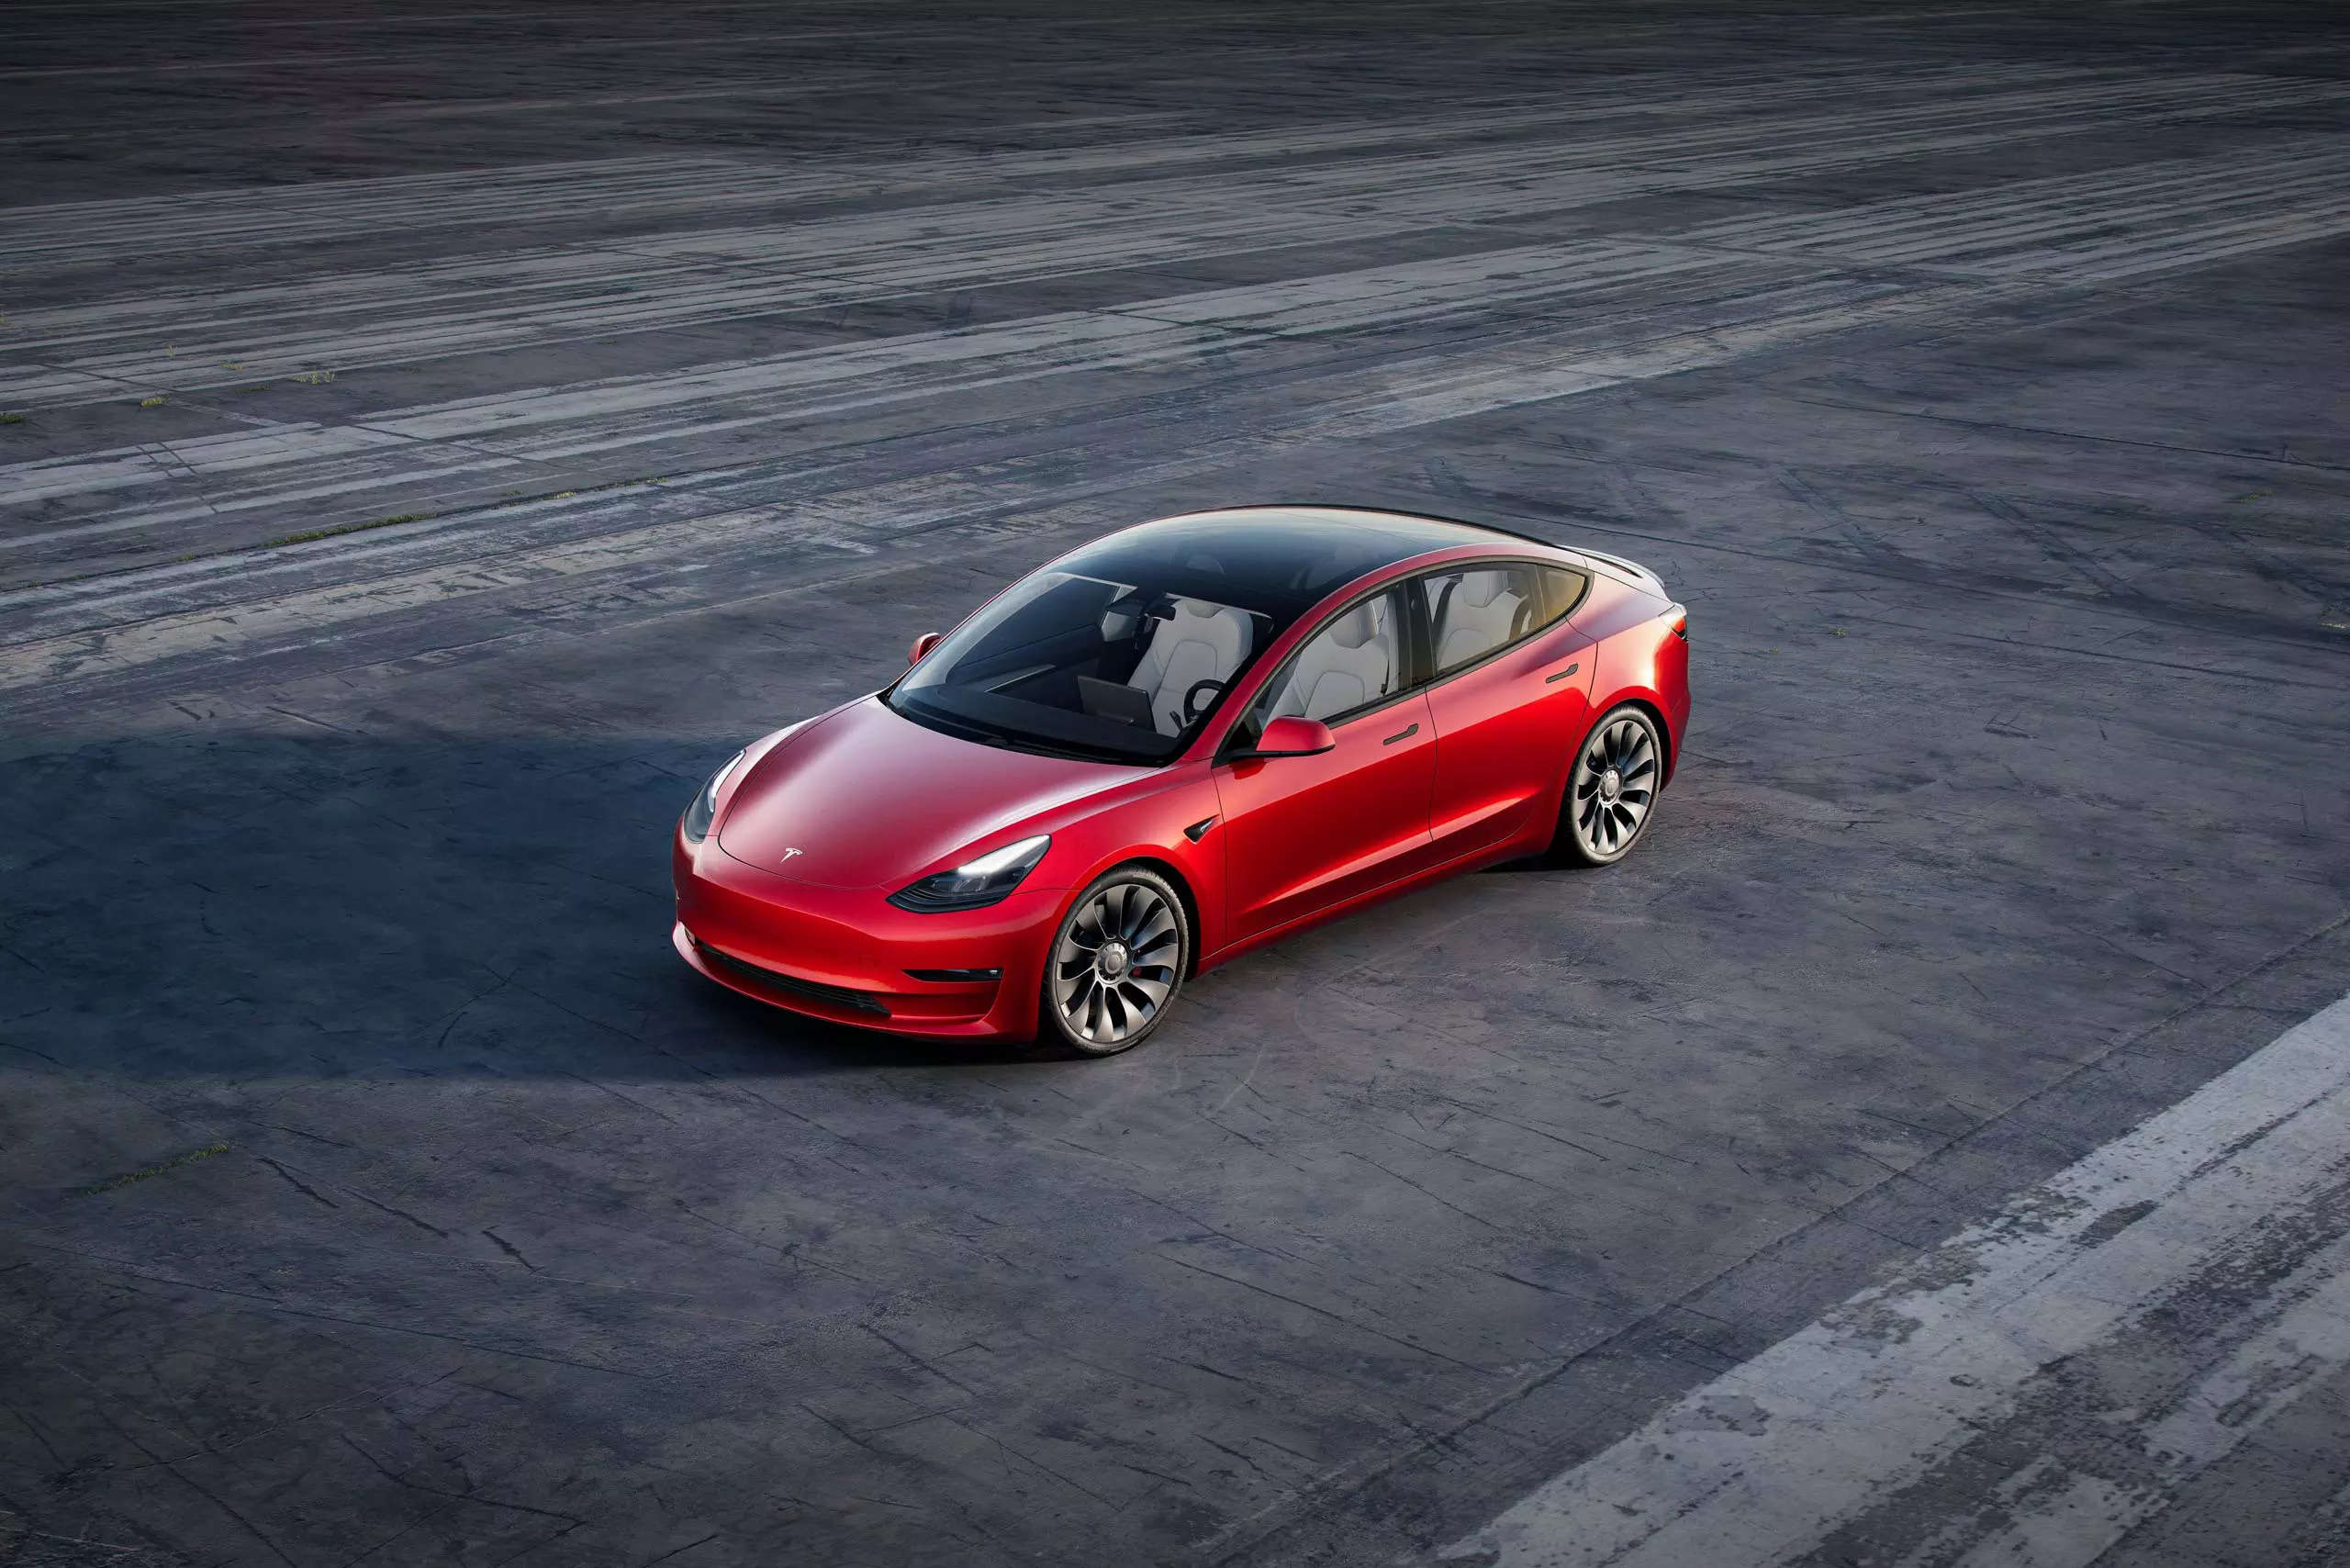 Exclusive: Tesla readies revamped Model 3 with project 'Highland